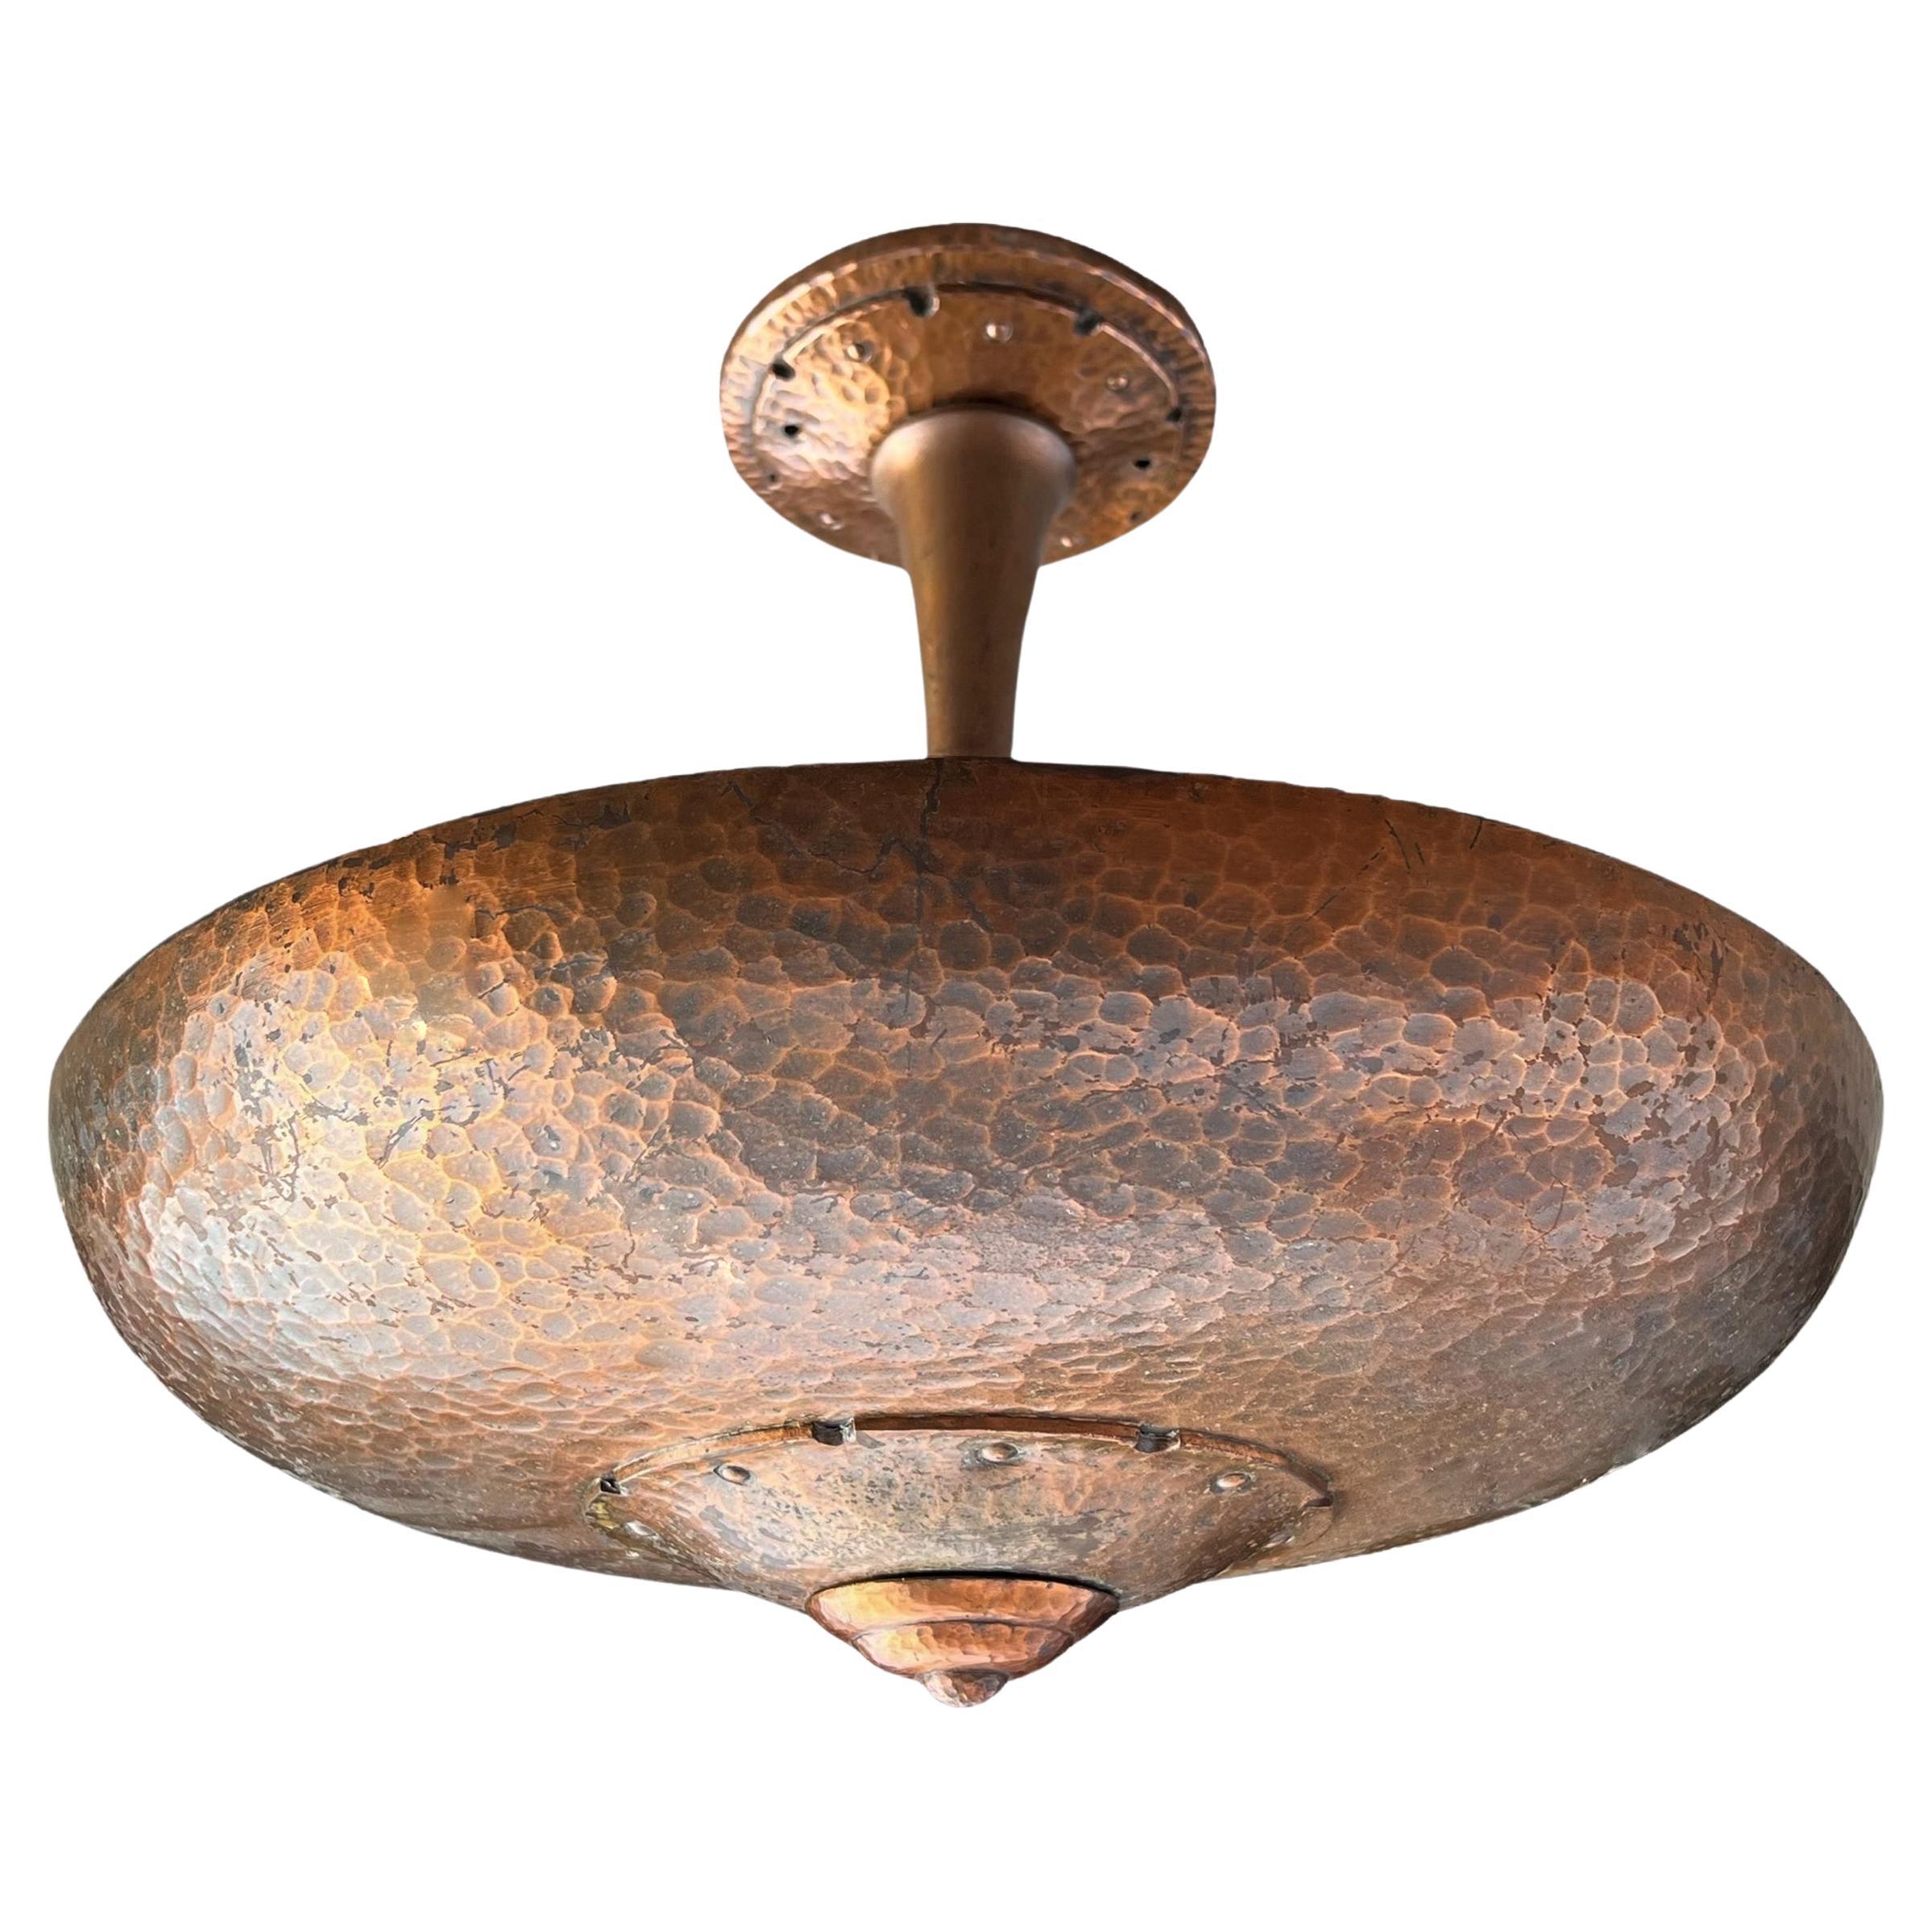 Early 20th Century American Art Deco Hammered Copper Light Fixture